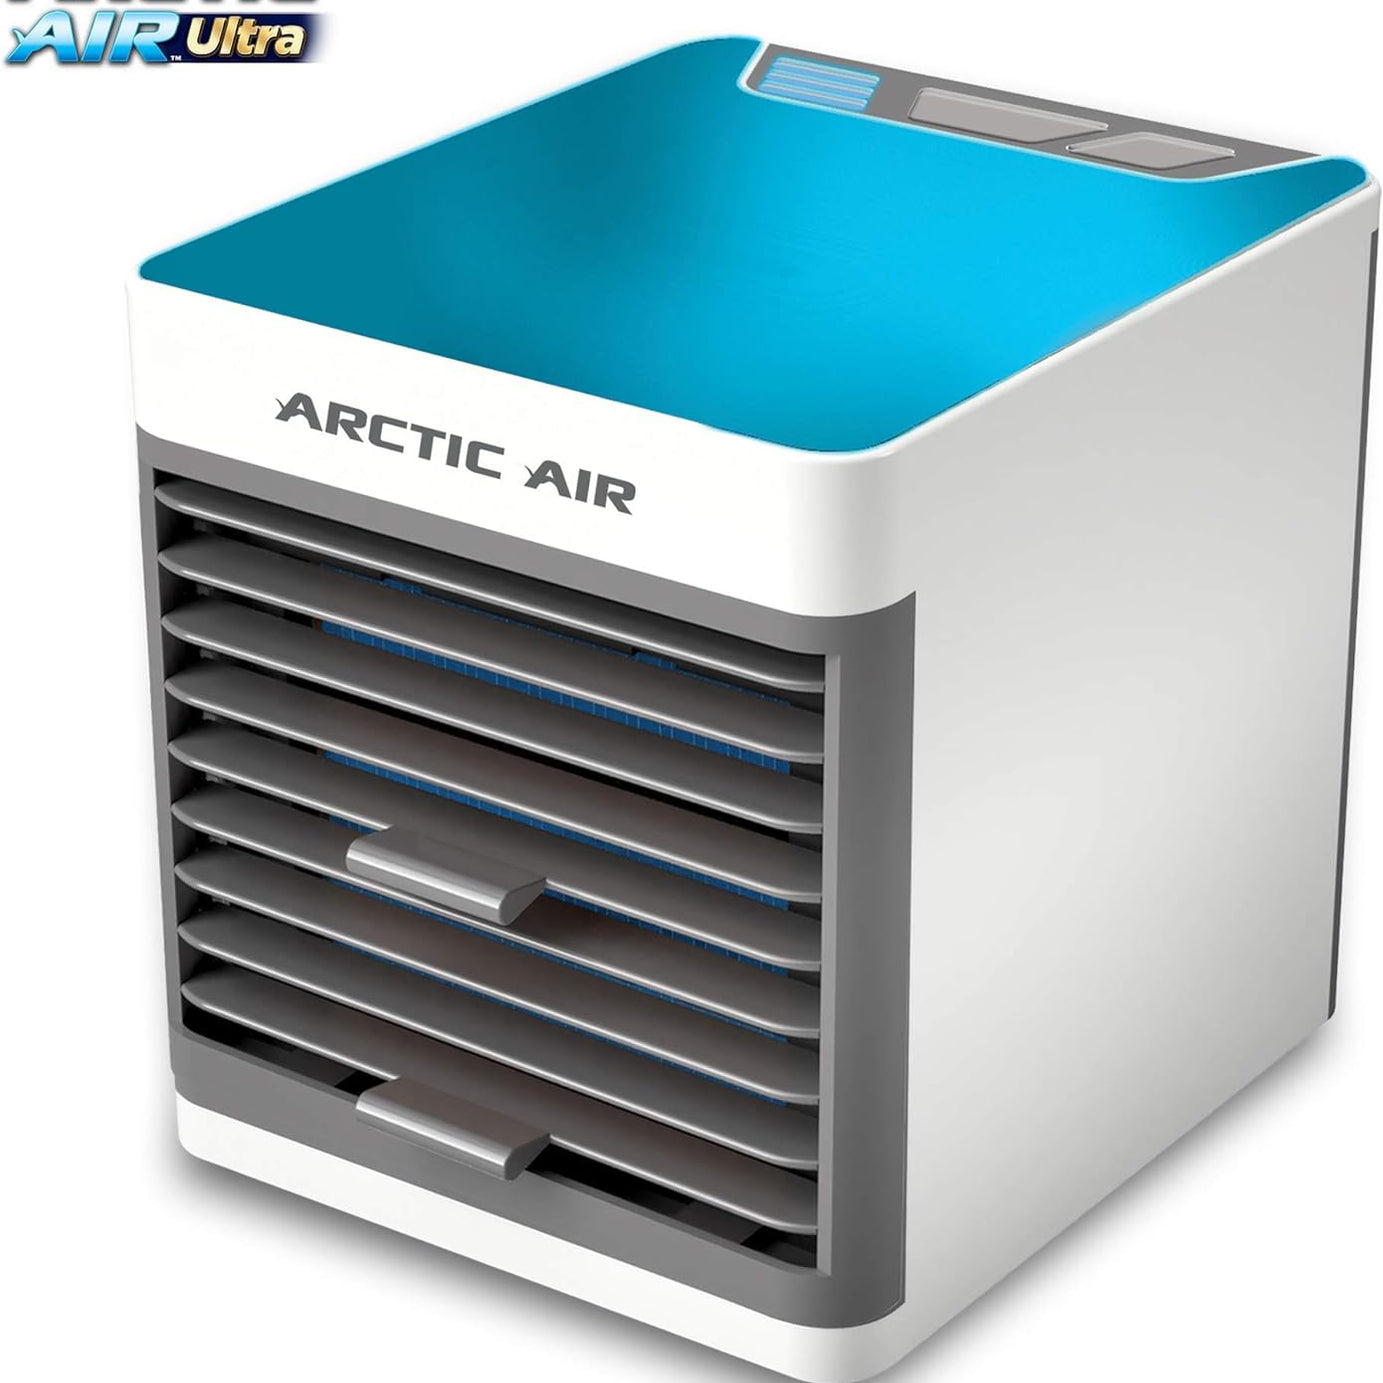 Arctic Air Ultra Evaporative Air Cooler Powerful 3-Speed, Lightweight, Portable Personal Space Cooler